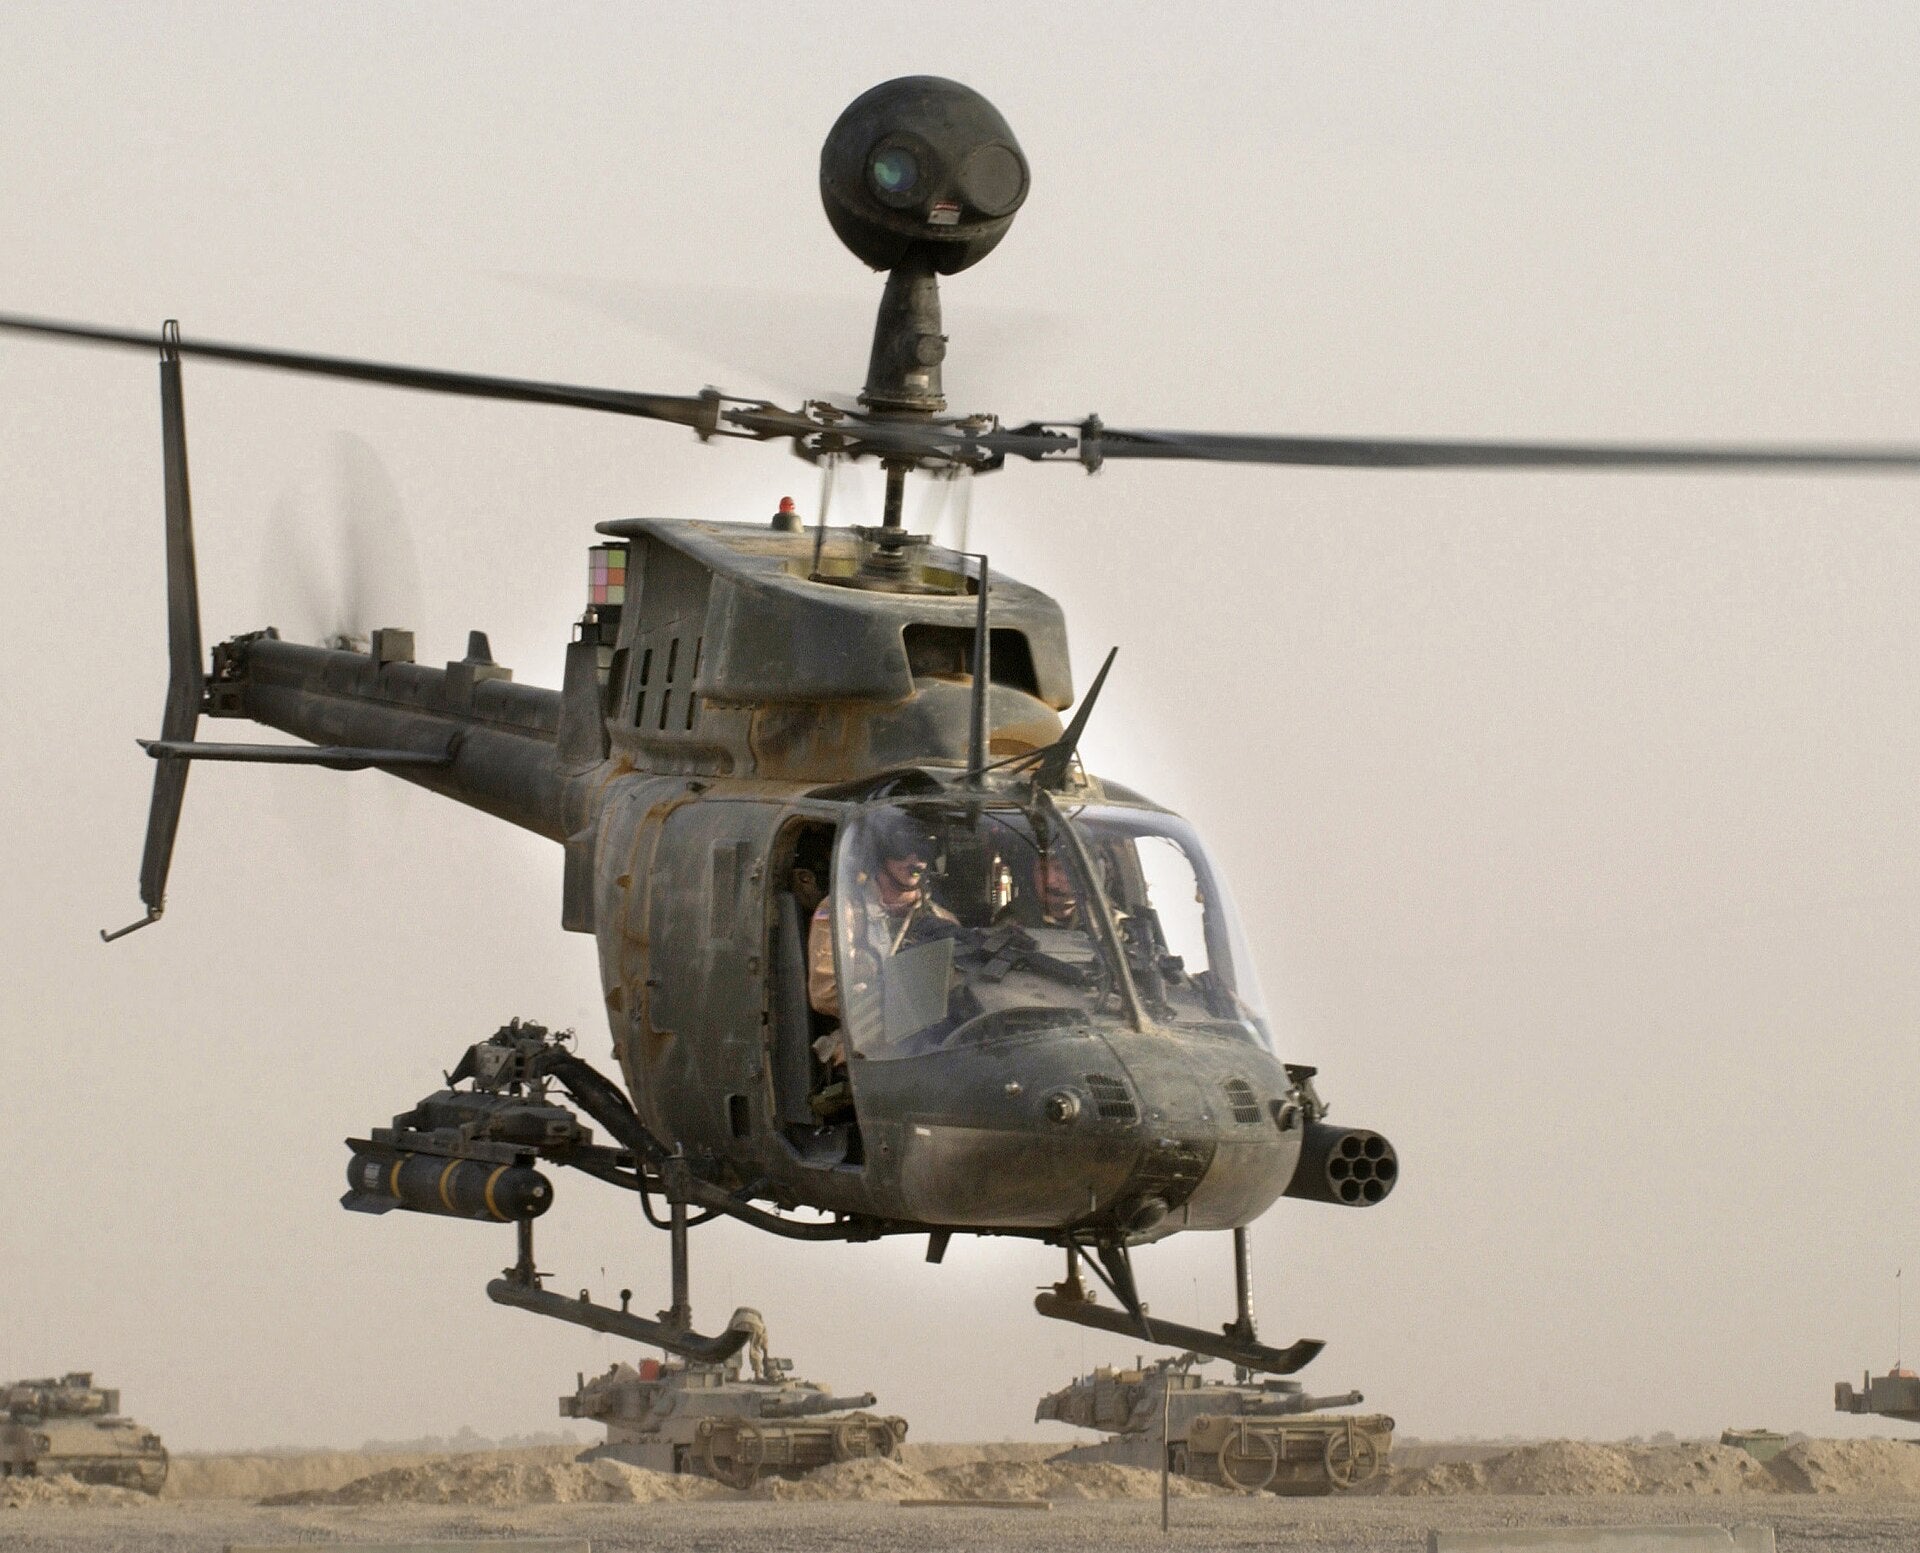 An OH-58D Kiowa Warrior helicopter from 1-4, Cavalry, 1st Infantry Division takes off from Forward Operation Base MacKenzie, Iraq for a mission Oct 23, 2004 during Operation Iraqi Freedom.  USAF photo by Staff Sgt. Shane A. Cuomo (RELEASED)